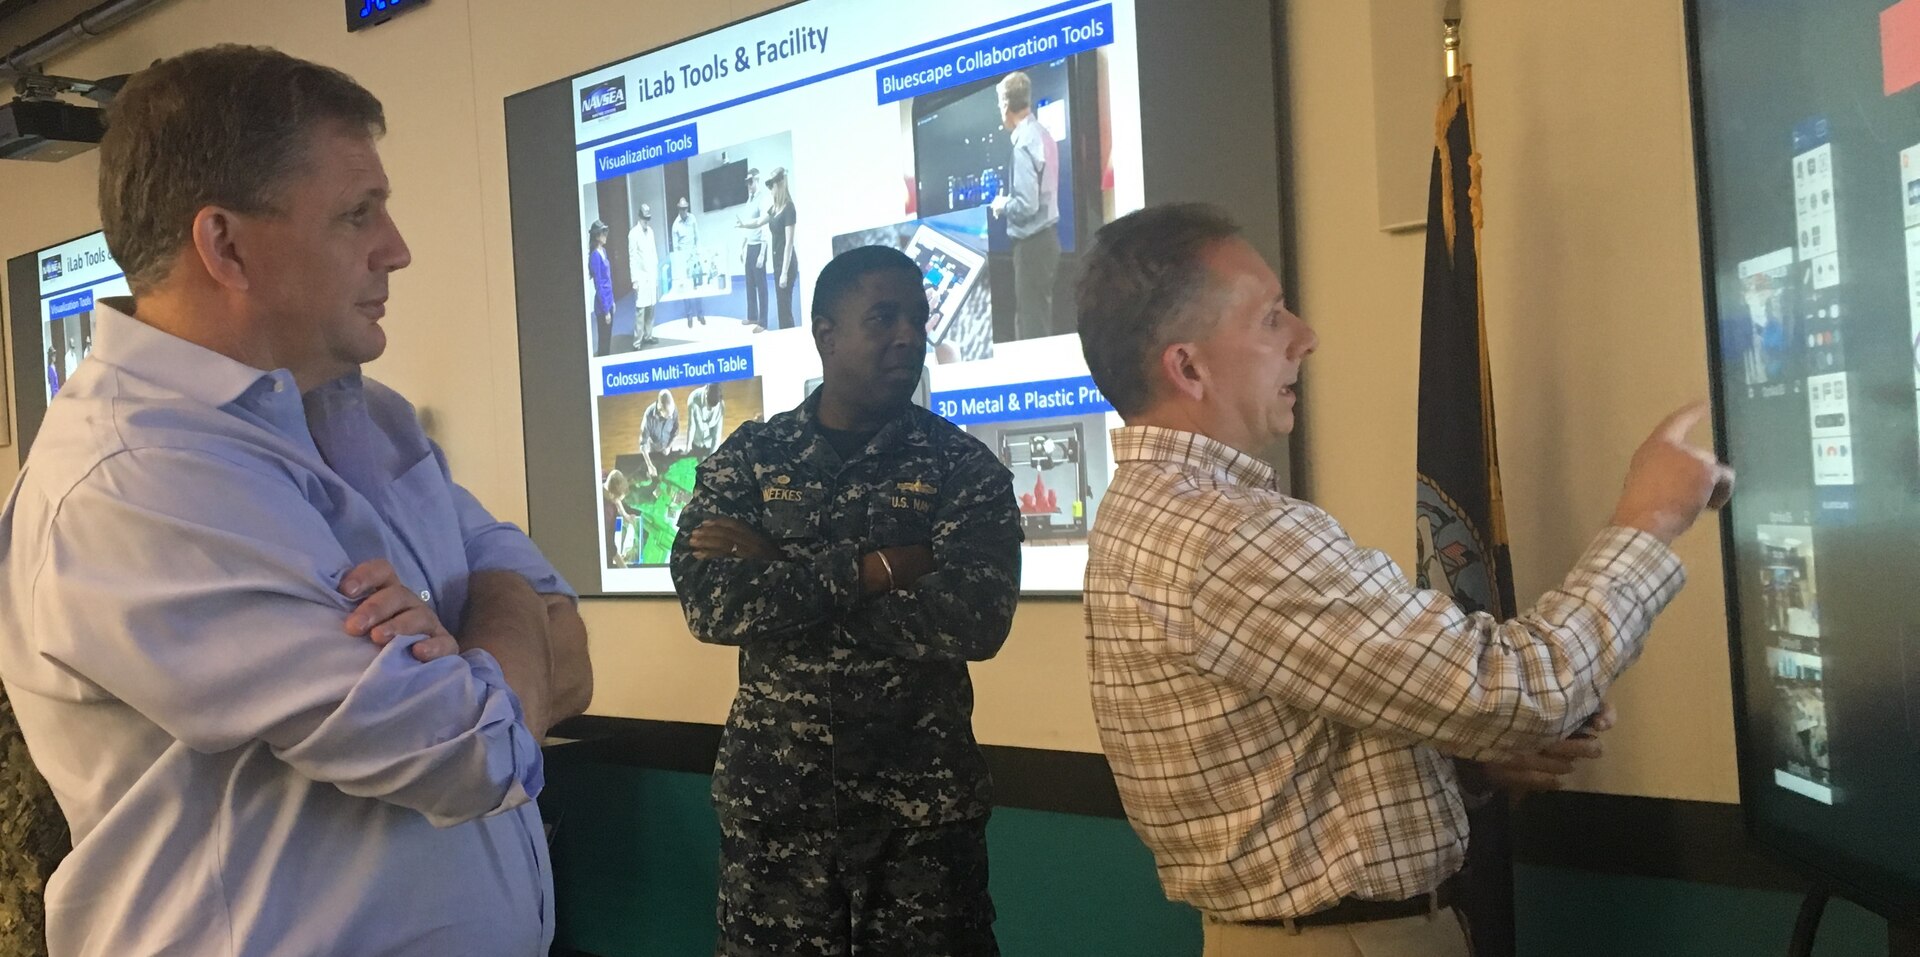 IMAGE: DAHLGREN, Va. (June 28, 2018) - Naval Surface Warfare Center Dahlgren Division (NSWCDD) Chief Innovation Officer Nelson Mills demonstrates the Bluescape collaboration software for James Geurts, Assistant Secretary of the Navy for Research for Development and Acquisition, during his tour of the NSWCDD Innovation Lab (iLab). NSWCDD Commanding Officer Capt. Godfrey 'Gus' Weekes looks on as Mills explains how the virtual workspace allows for real-time cloud-based collaboration. Virtualization and directed energy were among the briefs NSWCDD scientists and engineers presented to Geurts who also observed a laser demonstration. As the Navy's acquisition executive, Geurts has oversight of an annual budget in excess of $60 billion and is responsible for equipping and supporting Sailors and Marines with the best platforms, systems and technology as they operate around the globe in defense of the nation.